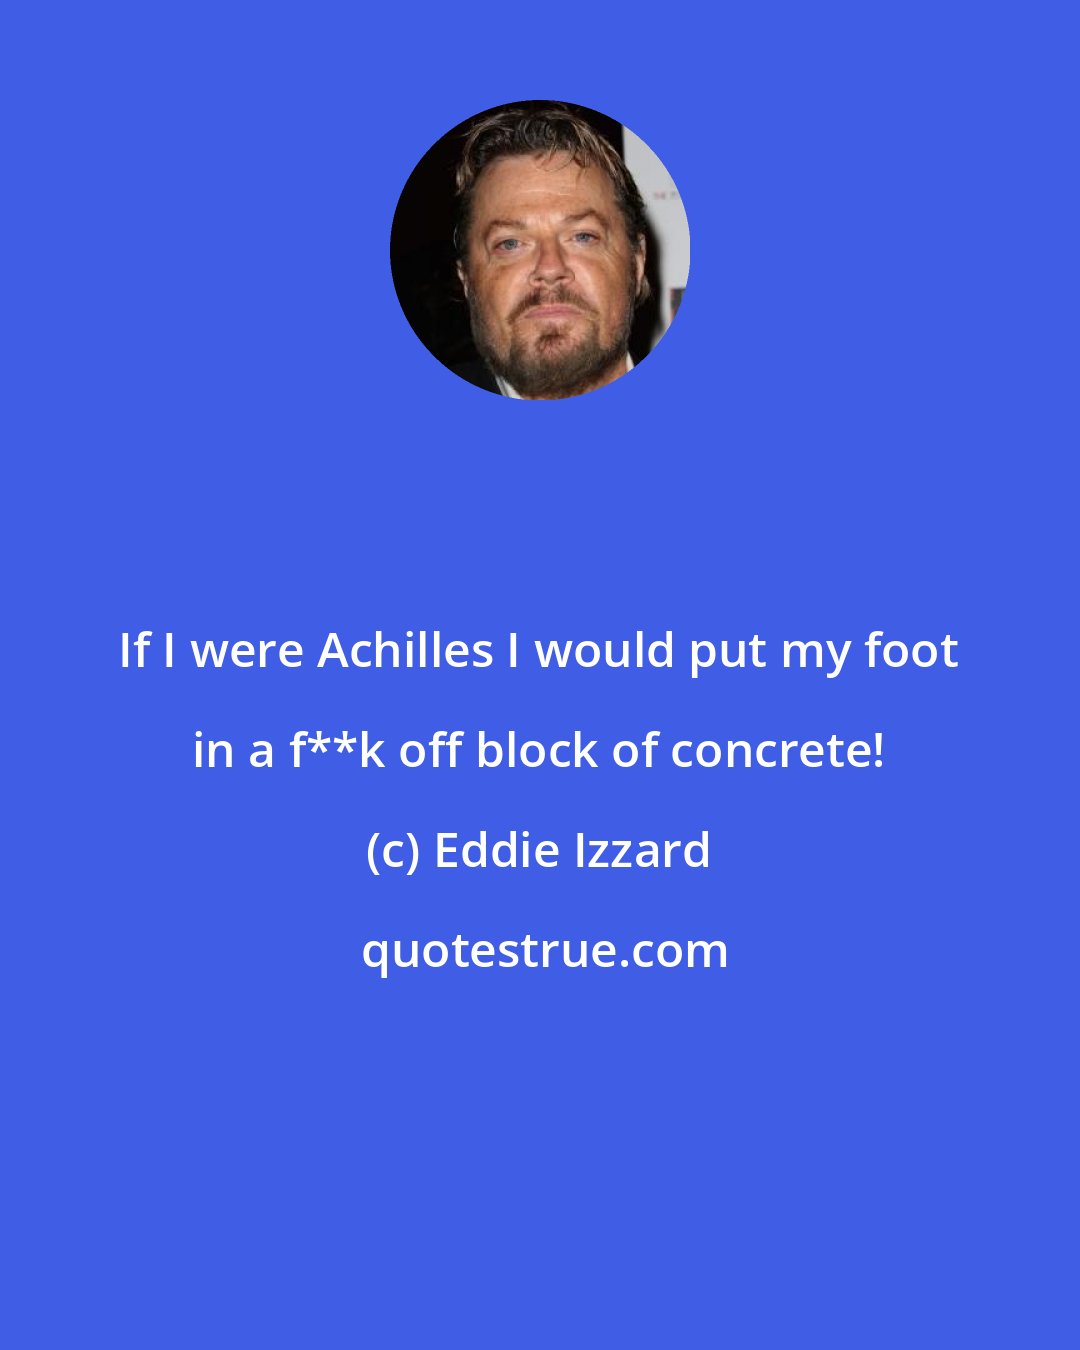 Eddie Izzard: If I were Achilles I would put my foot in a f**k off block of concrete!